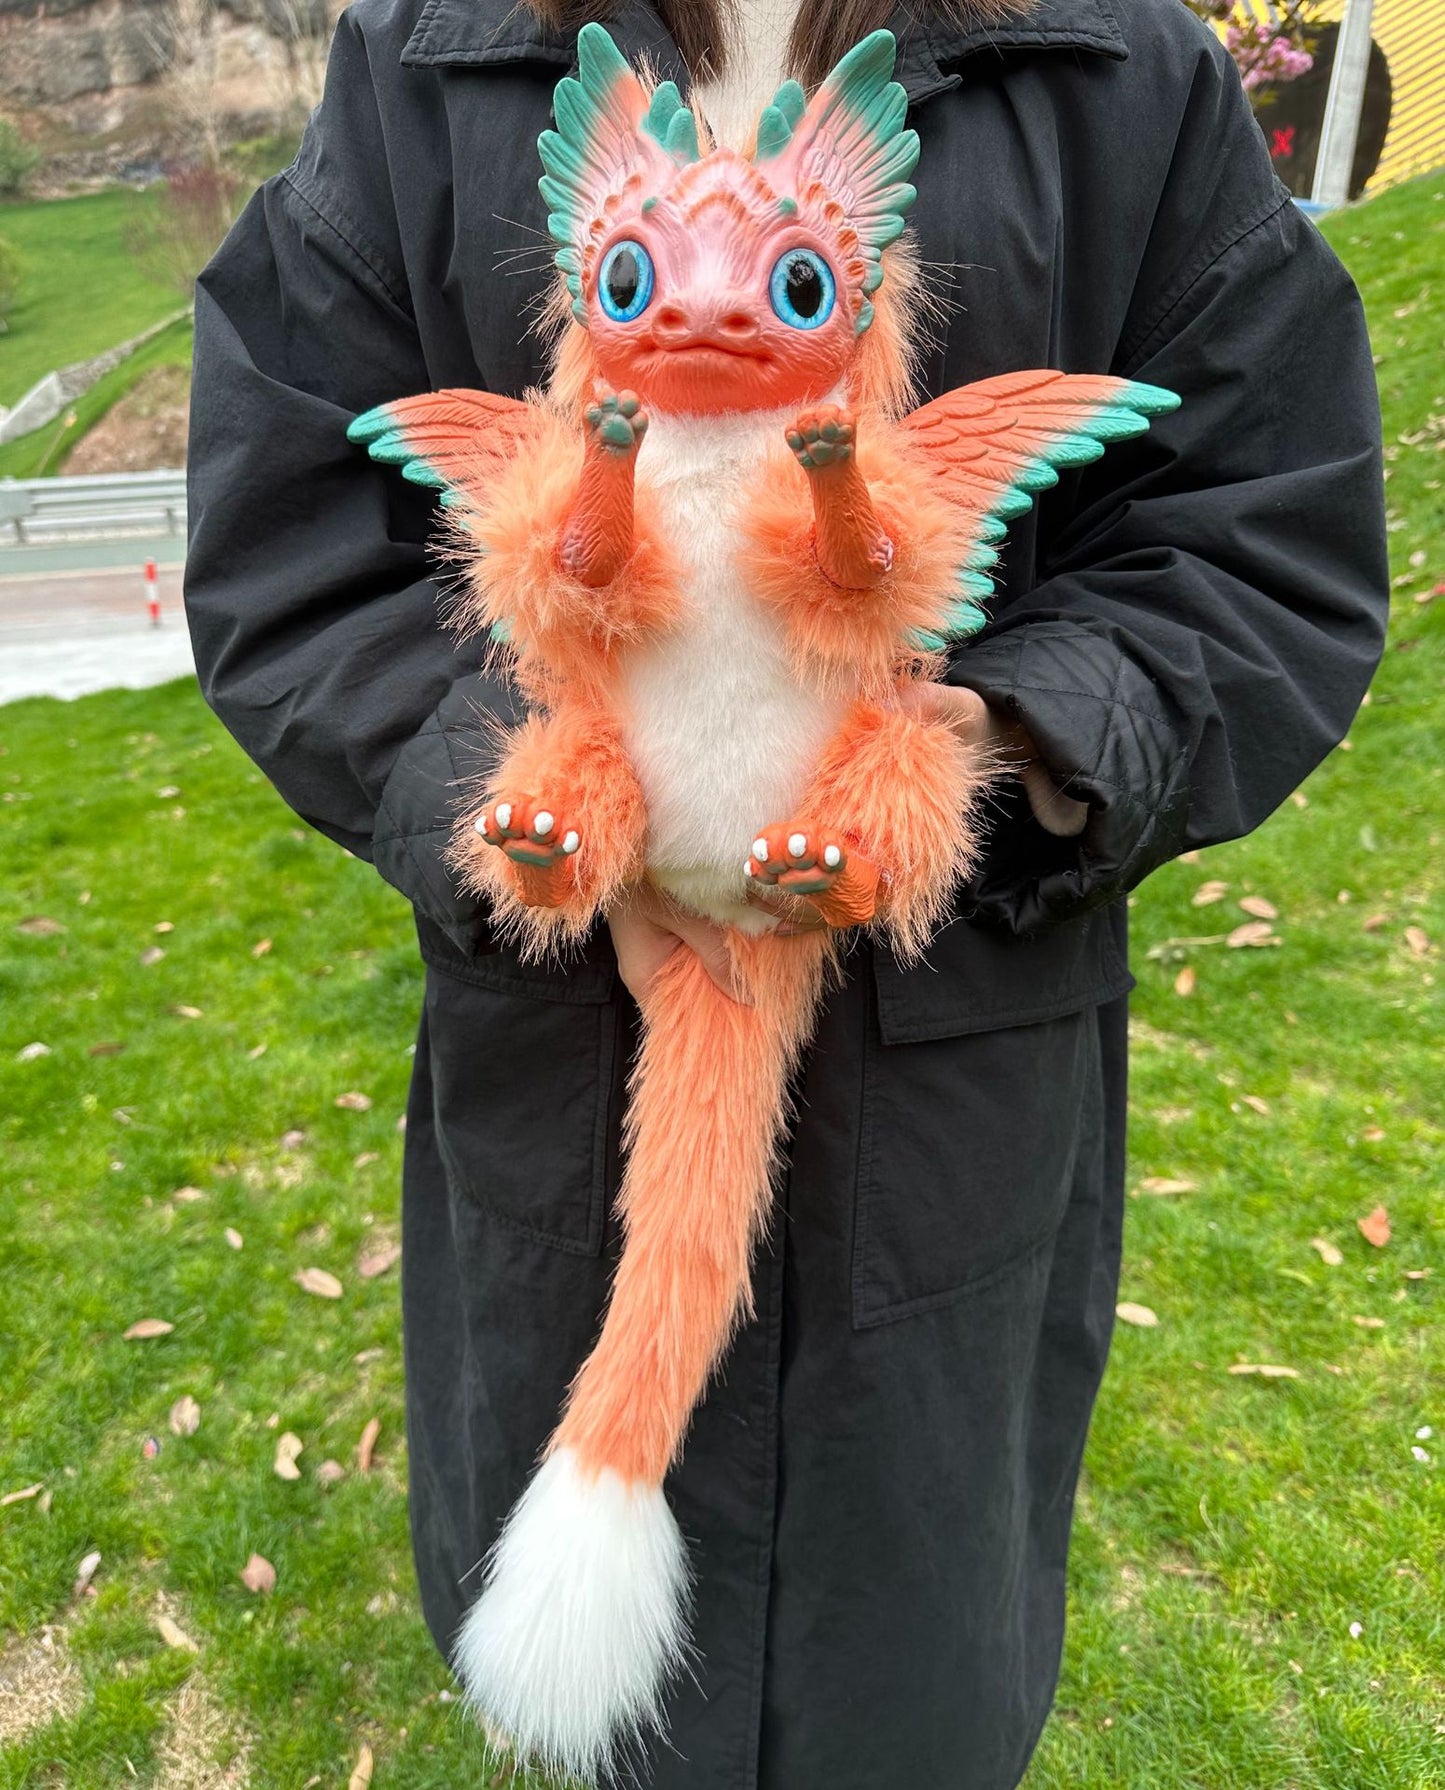 Embark on a Fantasy Journey with Our Majestic Flying Dragon Plush Toy